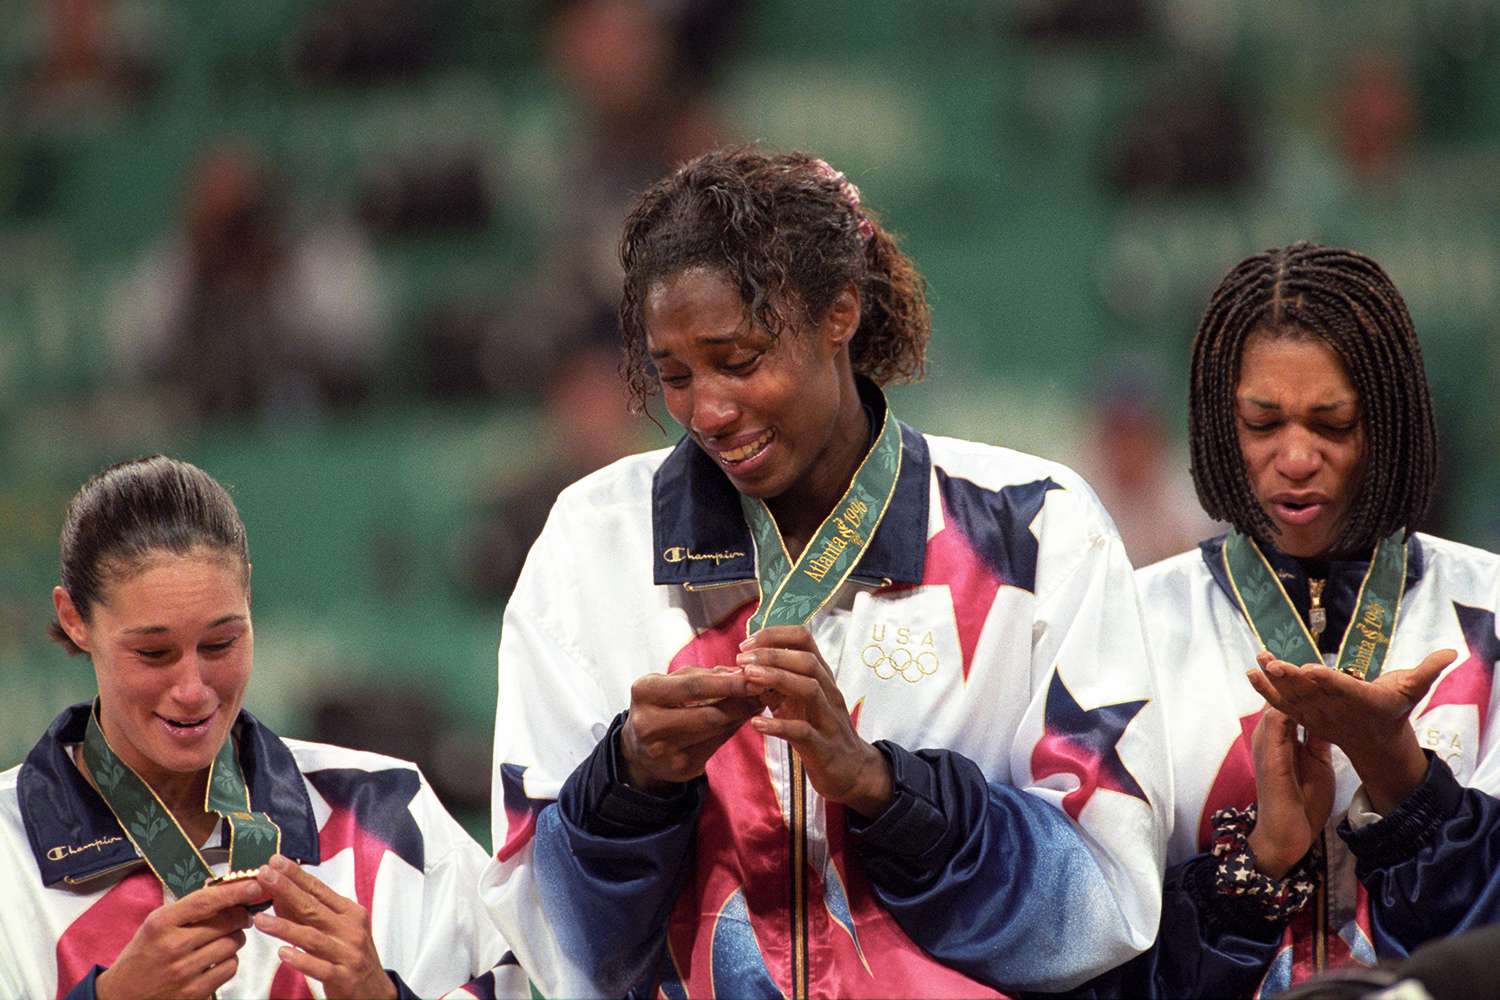 Jennifer Azzi, Lisa Leslie, and Carla McGhee victorious with medals and flowers on stand after winning Women's Gold Medal Game vs Brazil at Georgia Dome in 1996.